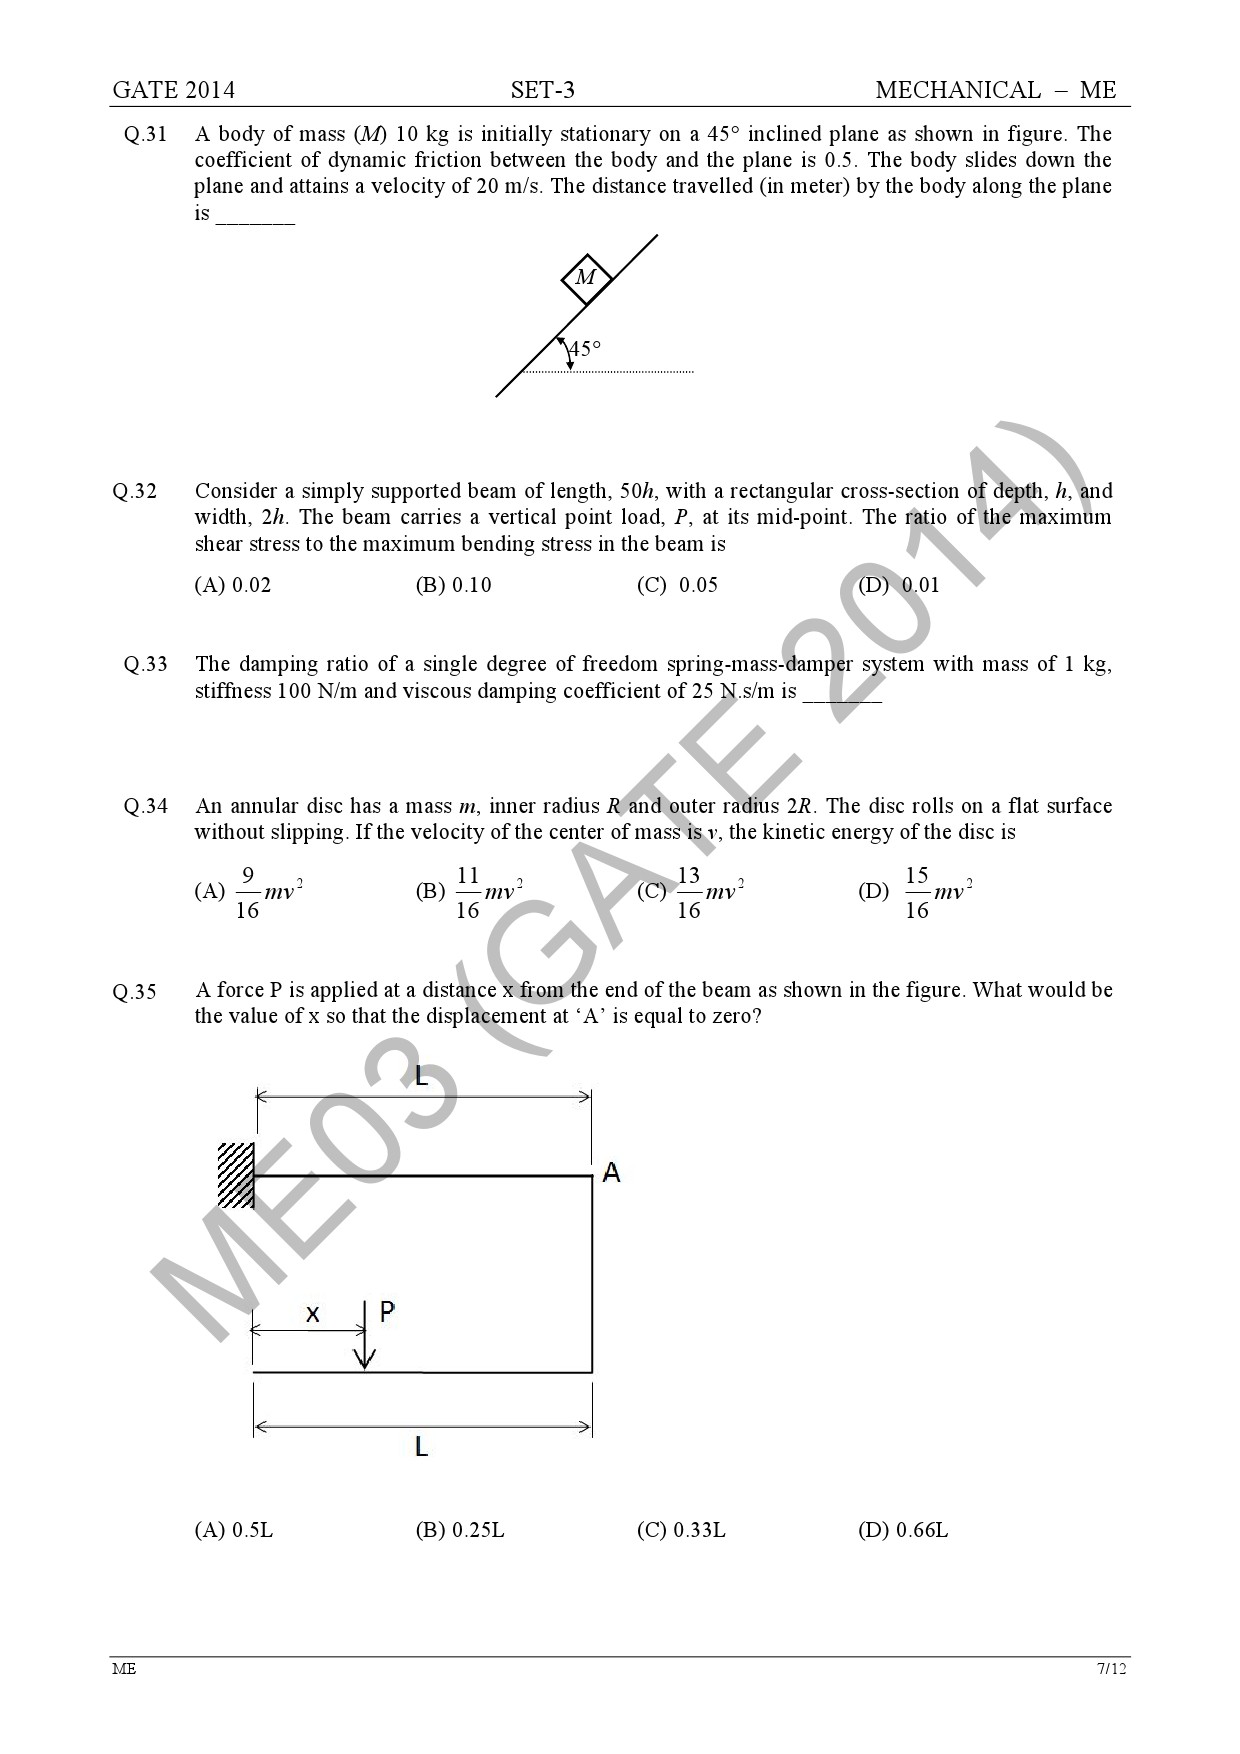 GATE Exam Question Paper 2014 Mechanical Engineering Set 3 14